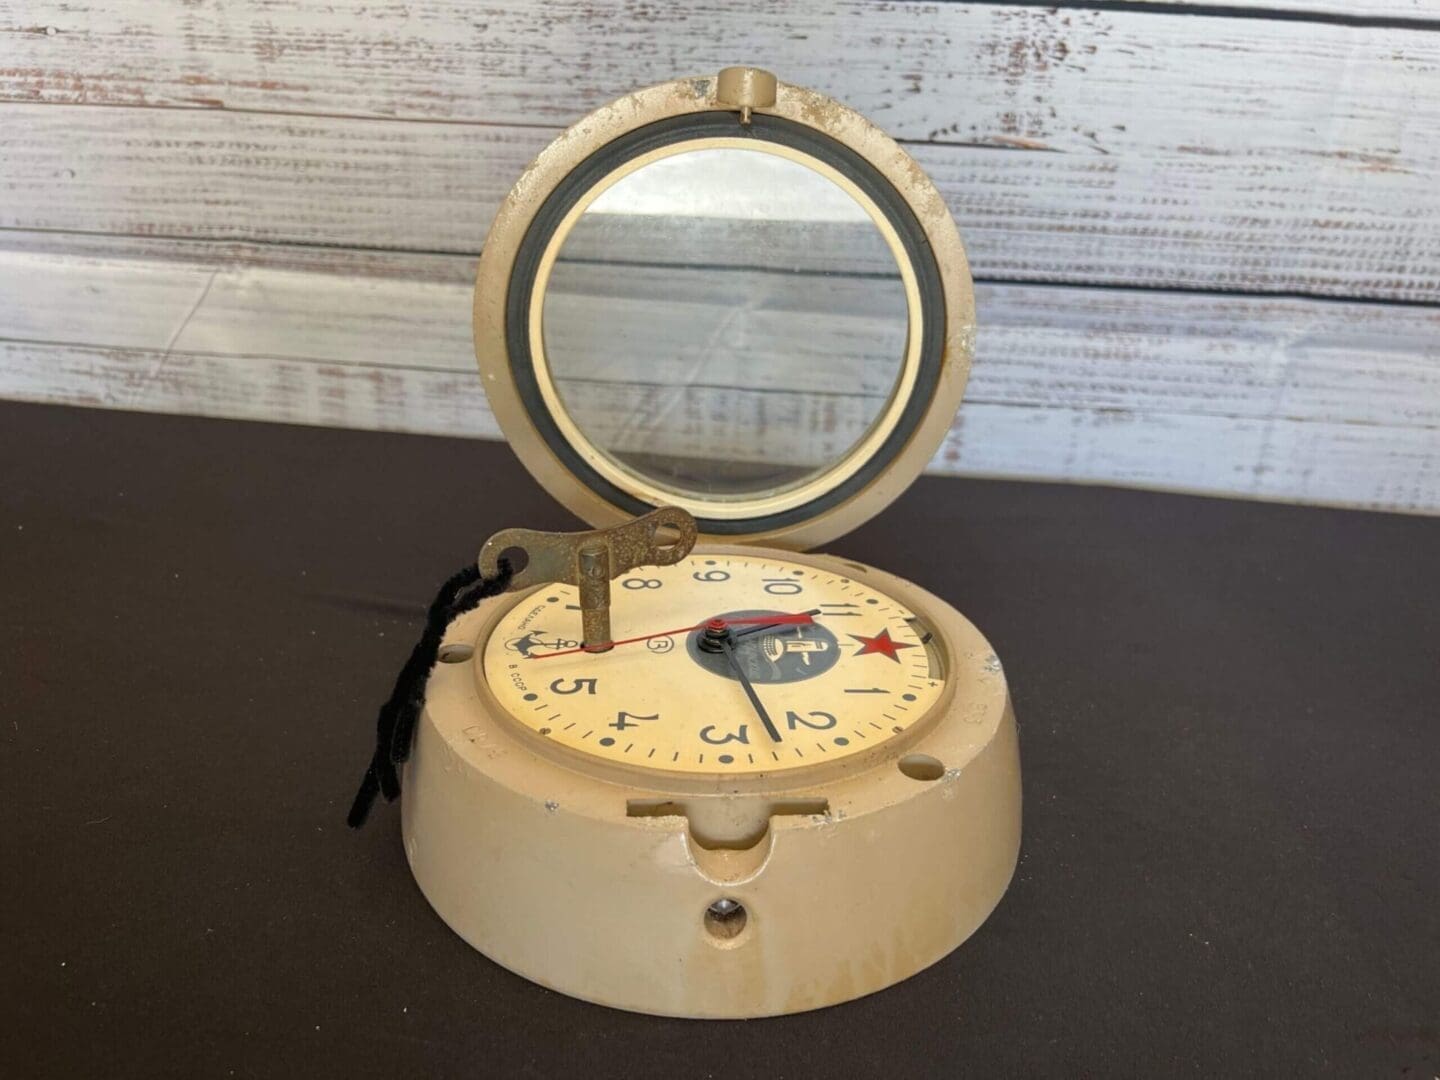 A Russian submarine clock with a mirror sitting on top of it.